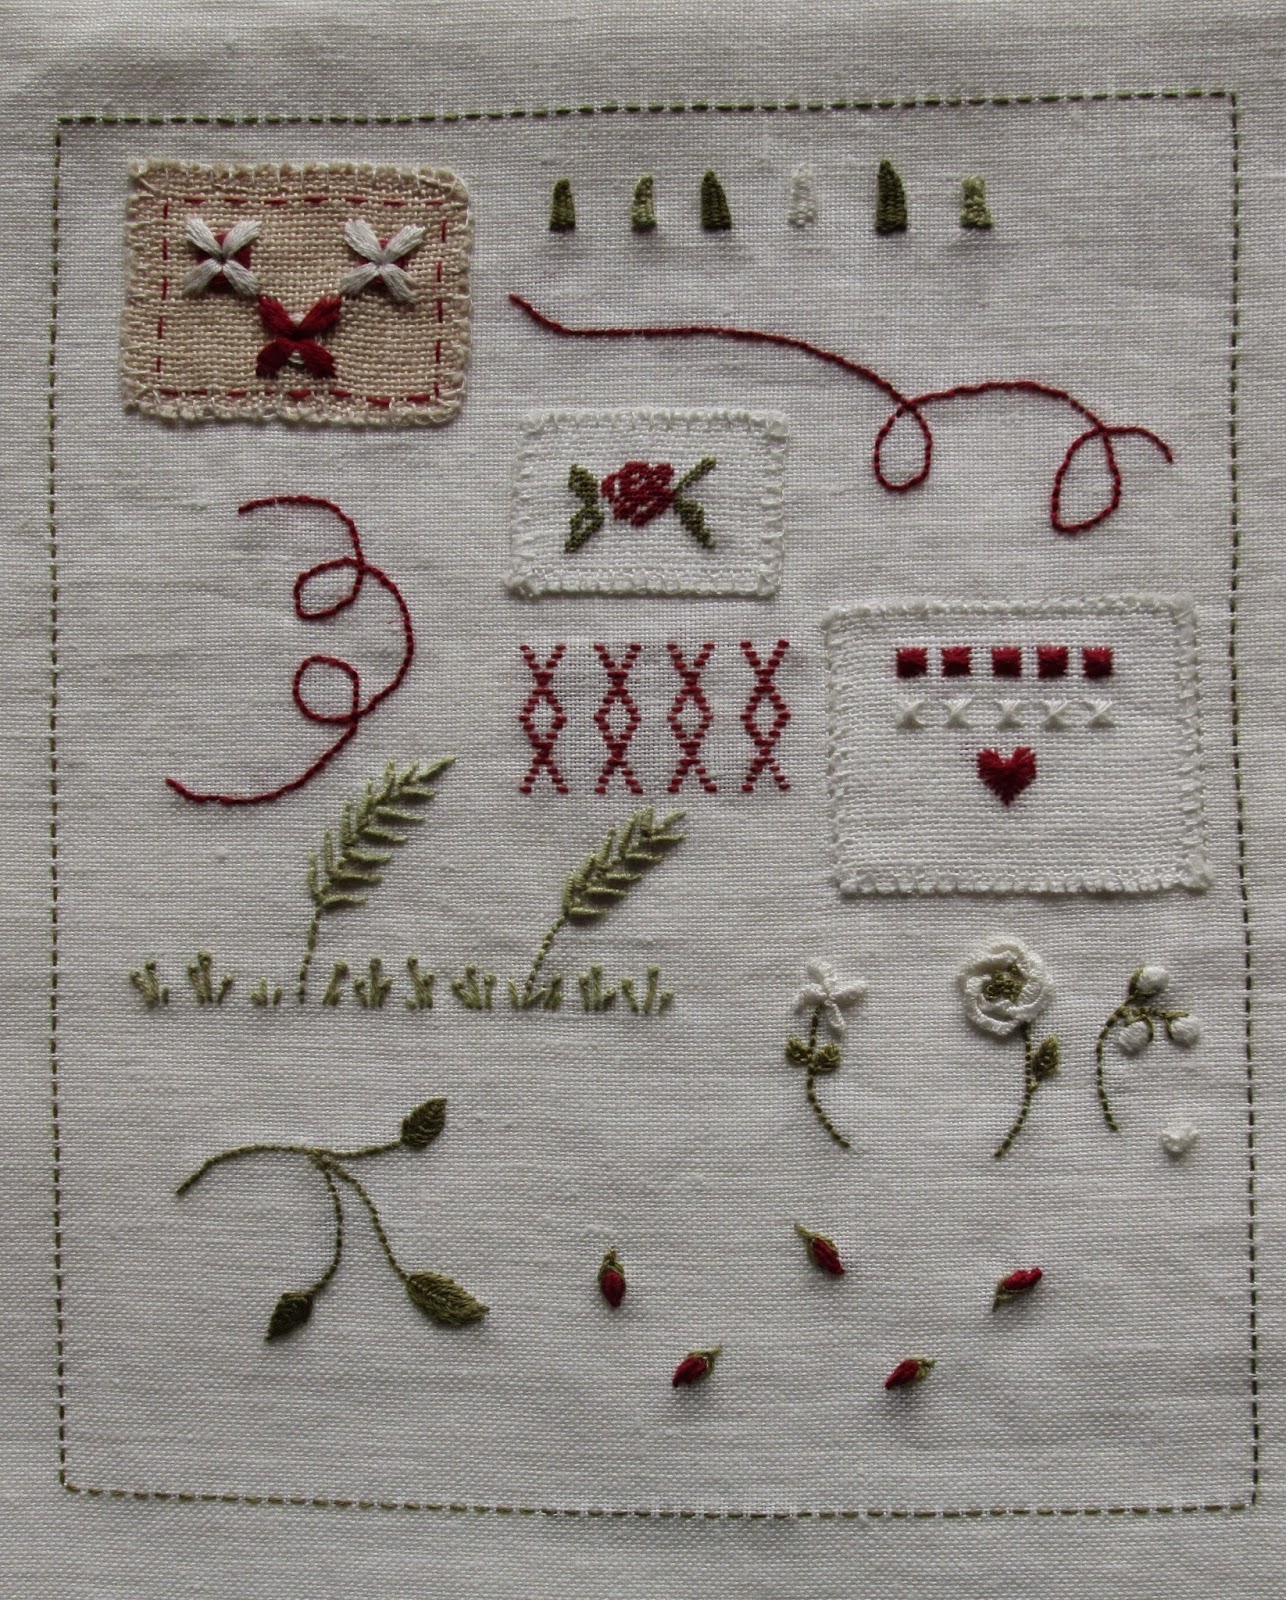 Fred's Wife: Mon Cahier de Broderie Hoja 4, pages 7 & 8